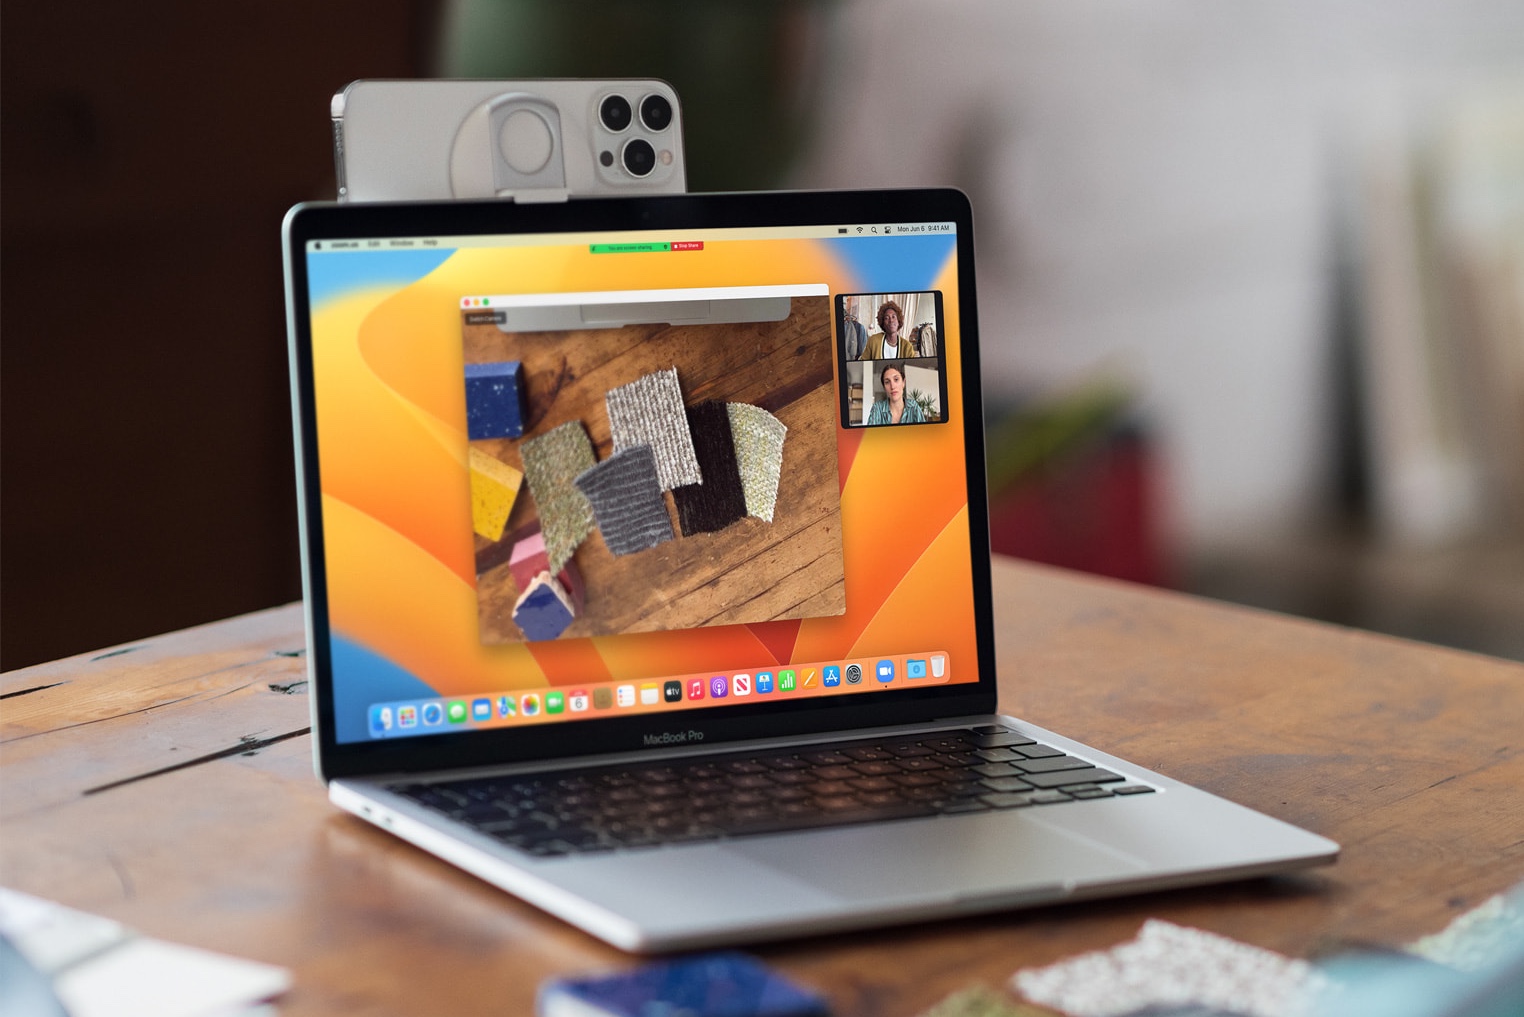 How to Use Your iPhone as a Webcam with Continuity Camera in macOS